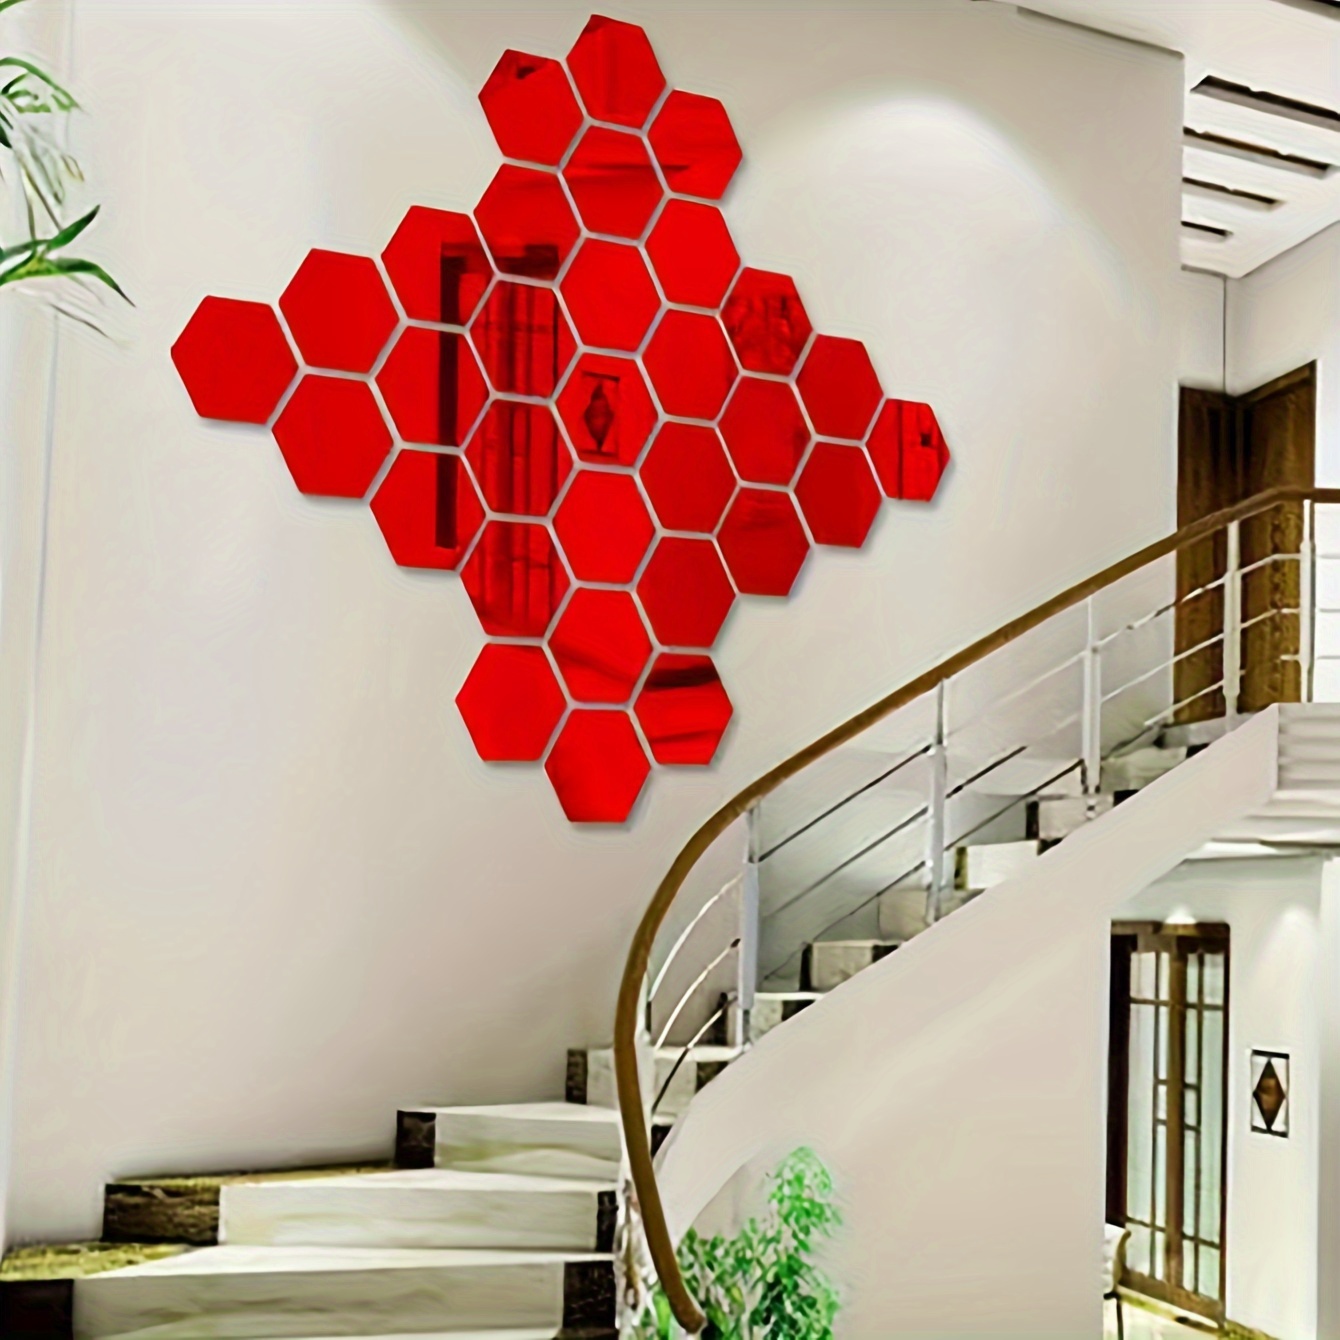 

12pcs Acrylic Hexagon Mirror 3d Wall Decor Stickers Tiles Self Adhesive Decorations For Bedroom Living Dining Dorm Room Kitchen Bathroom Apartment Office Aesthetic - Red